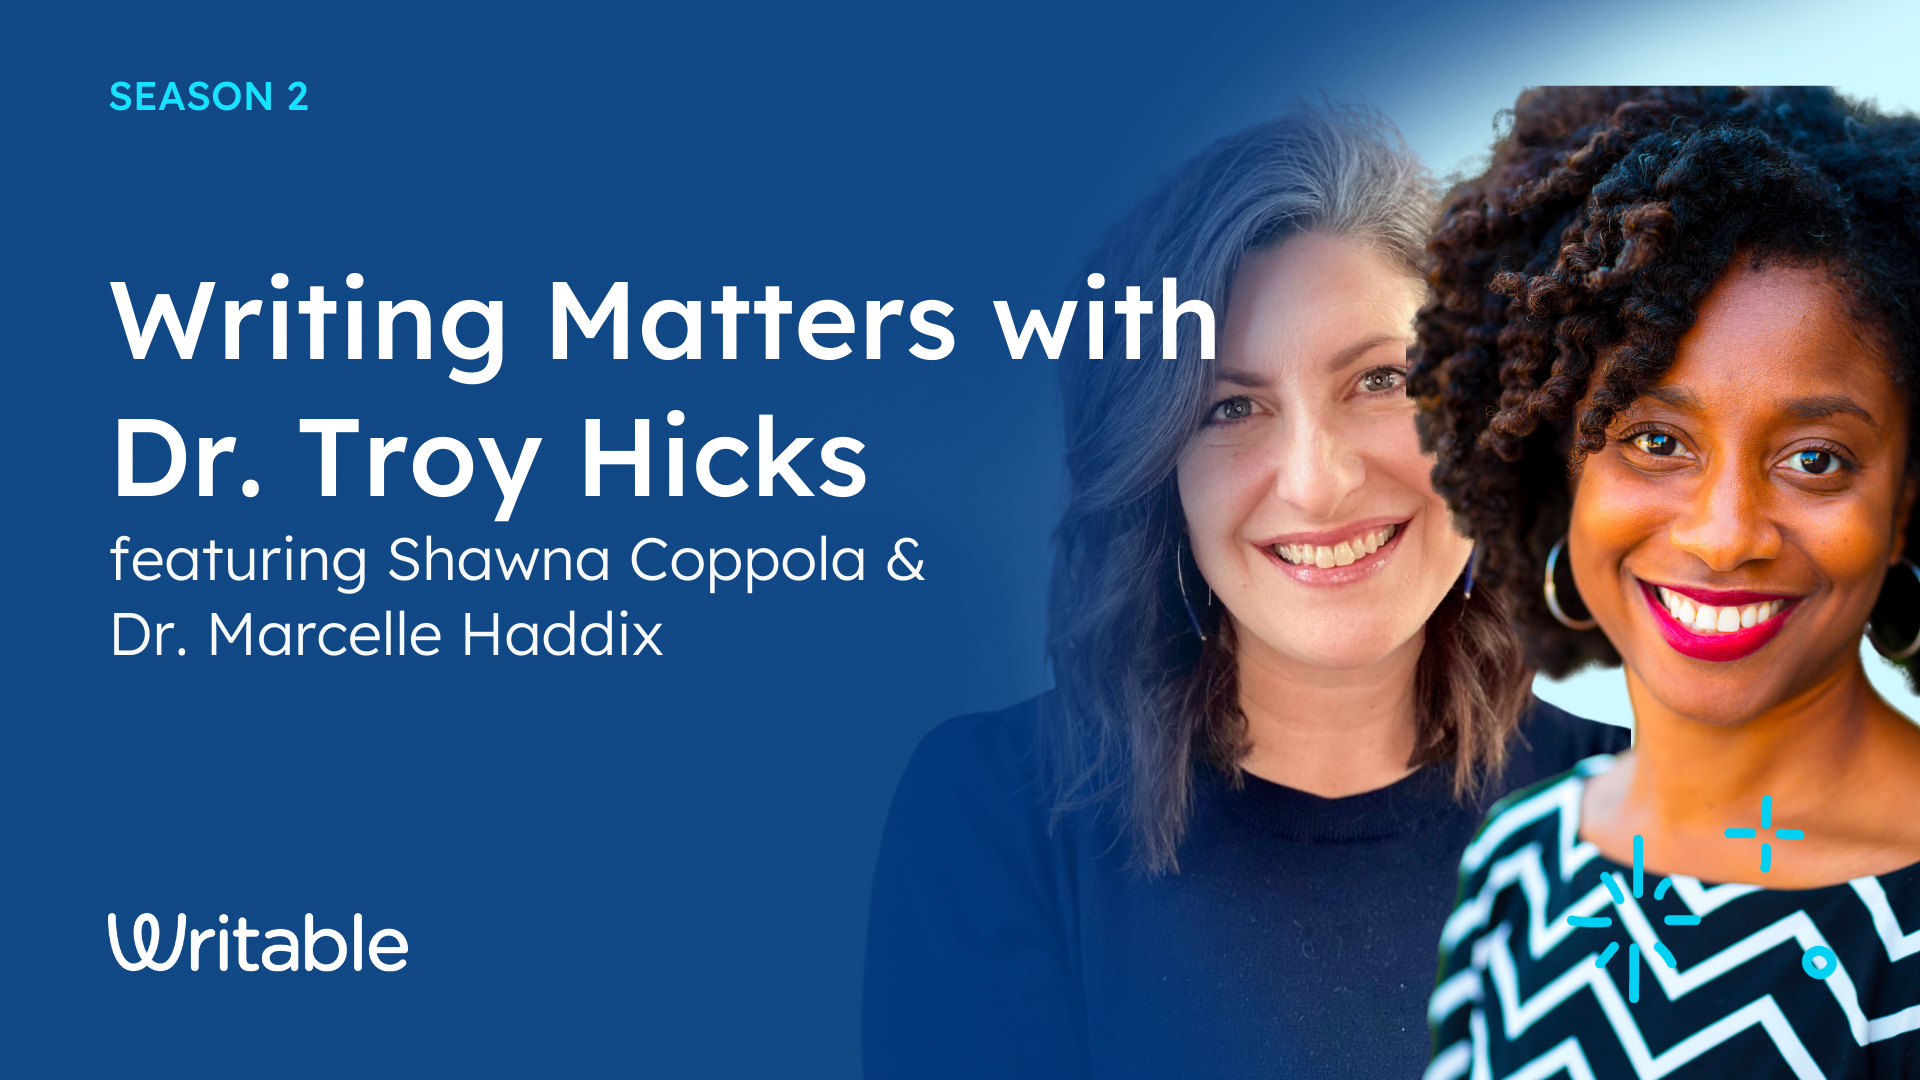 Writing Matters with Dr. Troy Hicks ft. Shawna Coppola & Marcelle Haddix